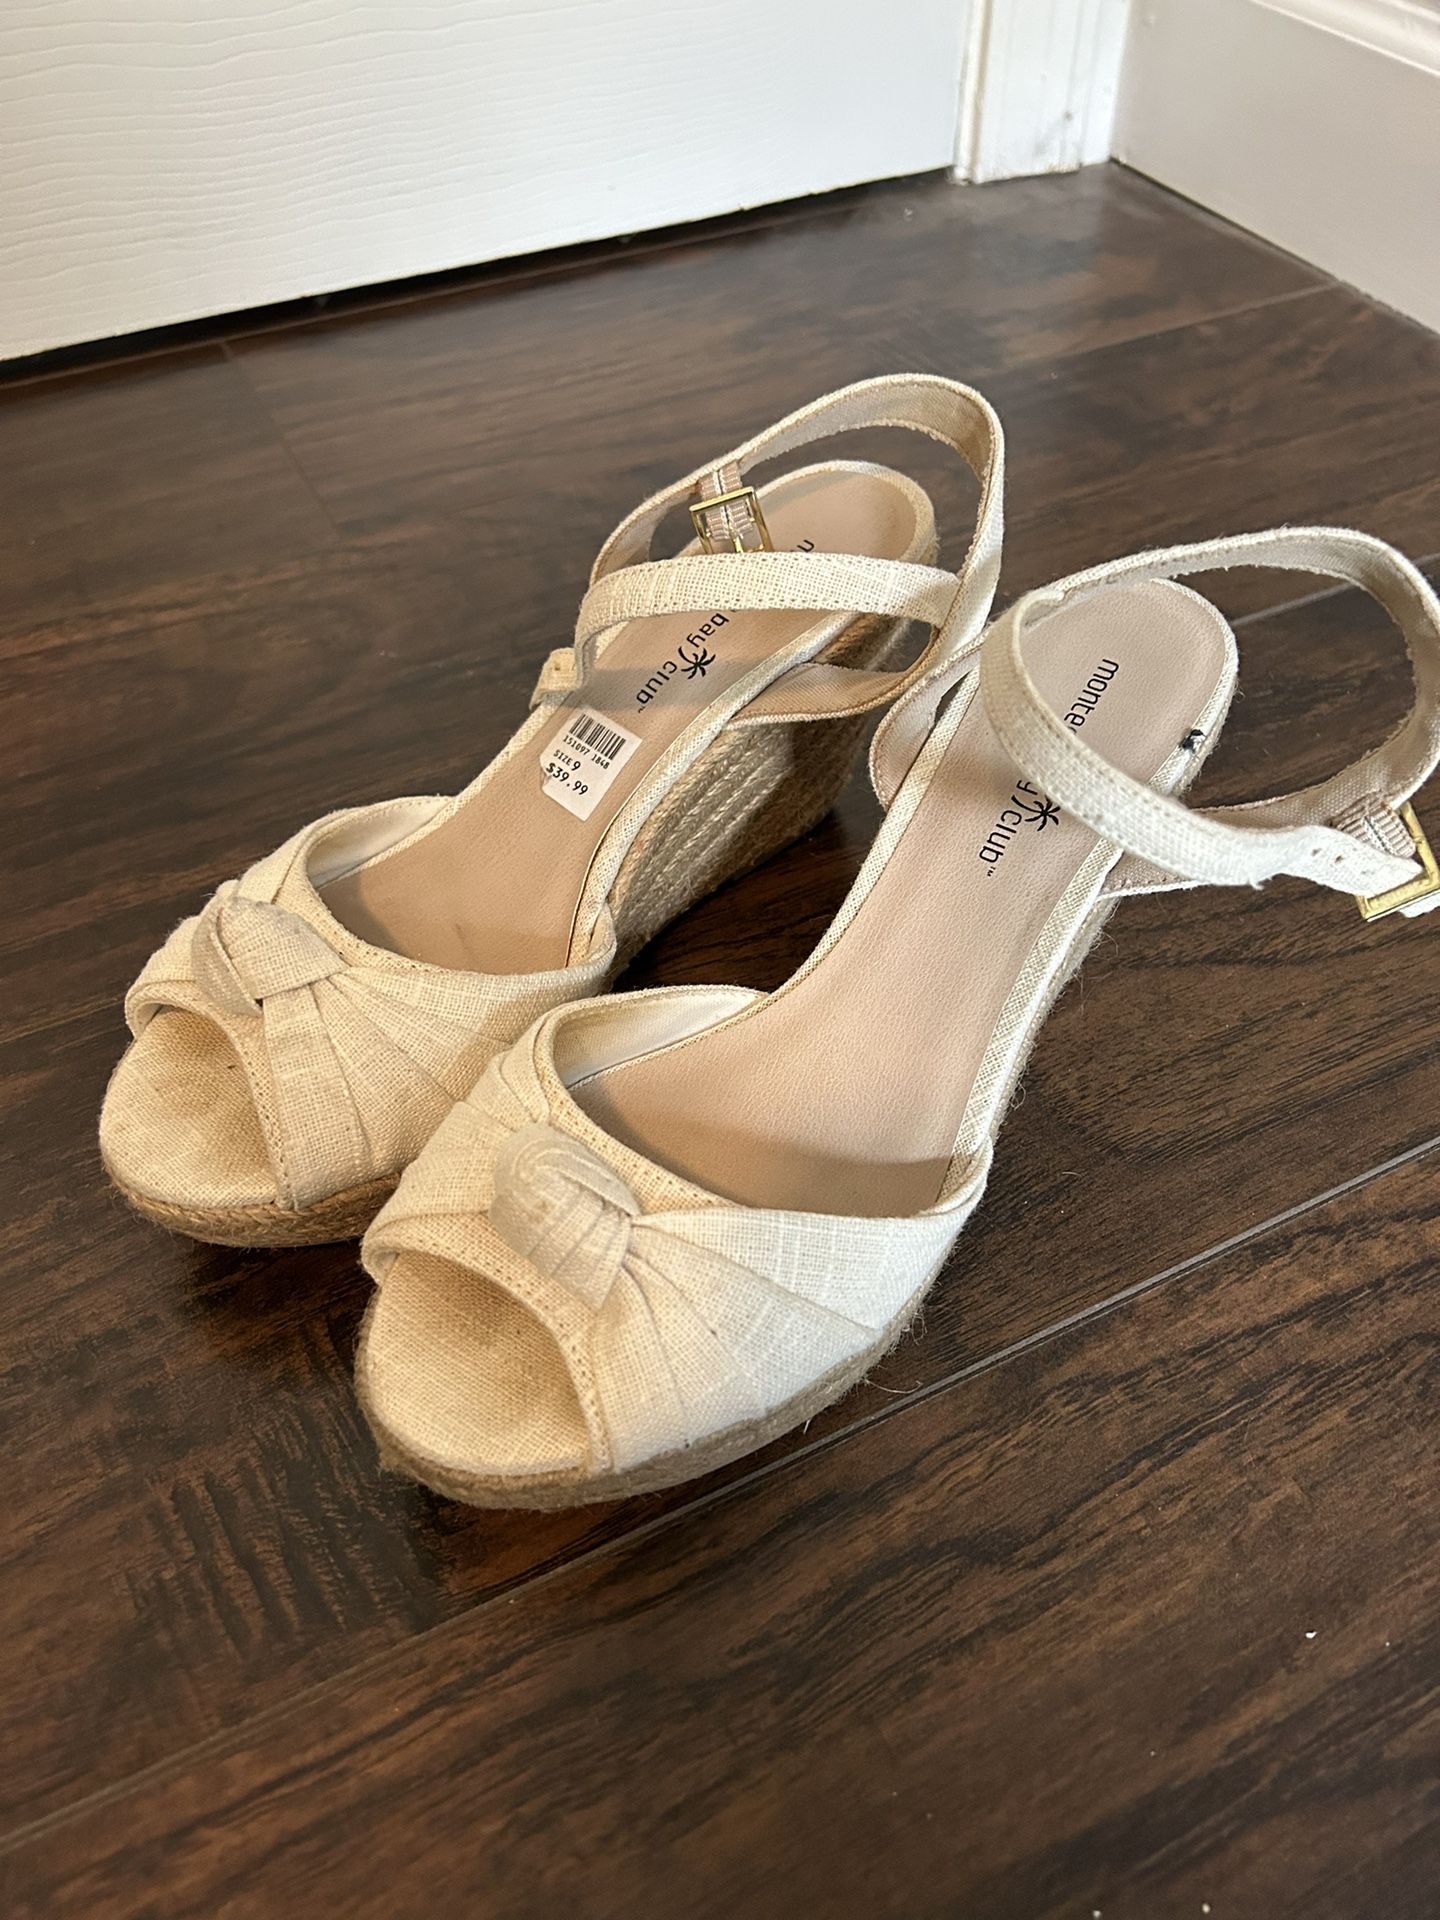 White And Tweed Women’s Wedges 